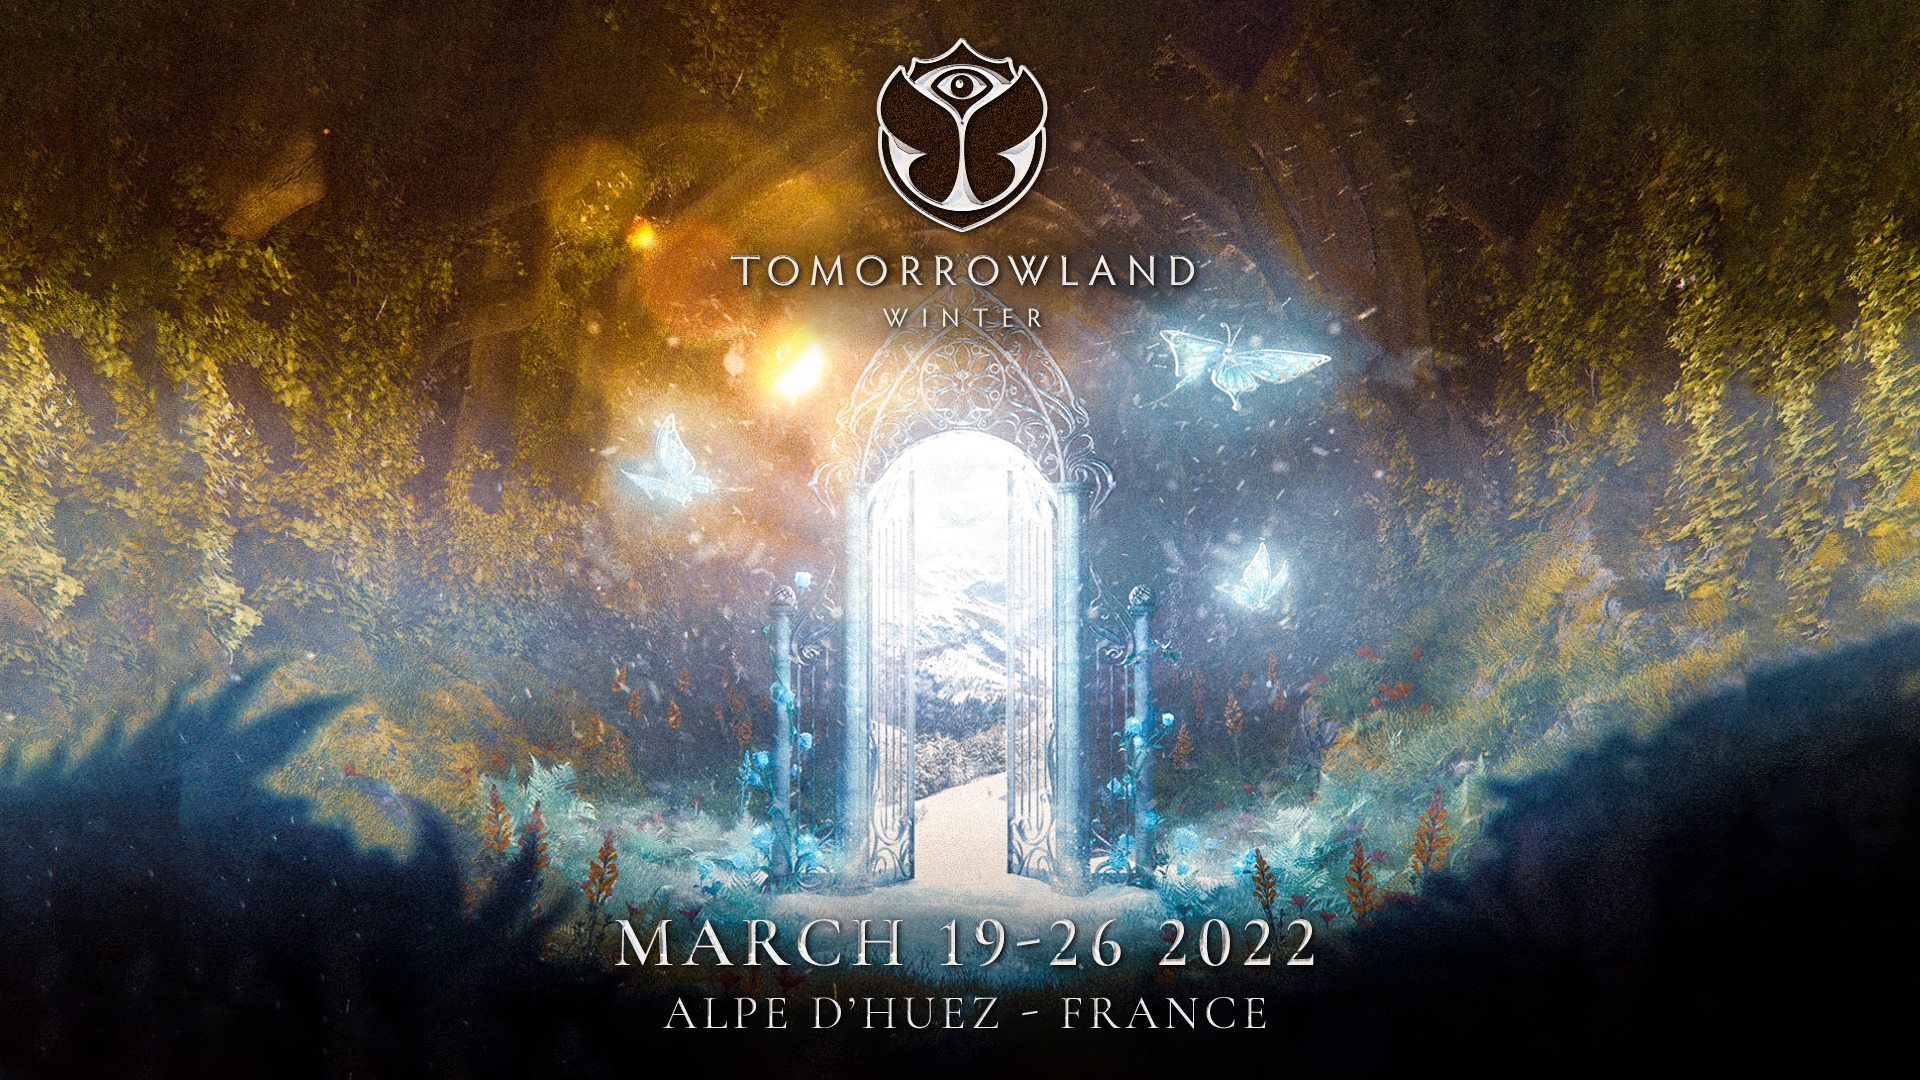 Tomorrowland returns to Alpe d'Huez for the second edition of Tomorrowland Winter in 2022